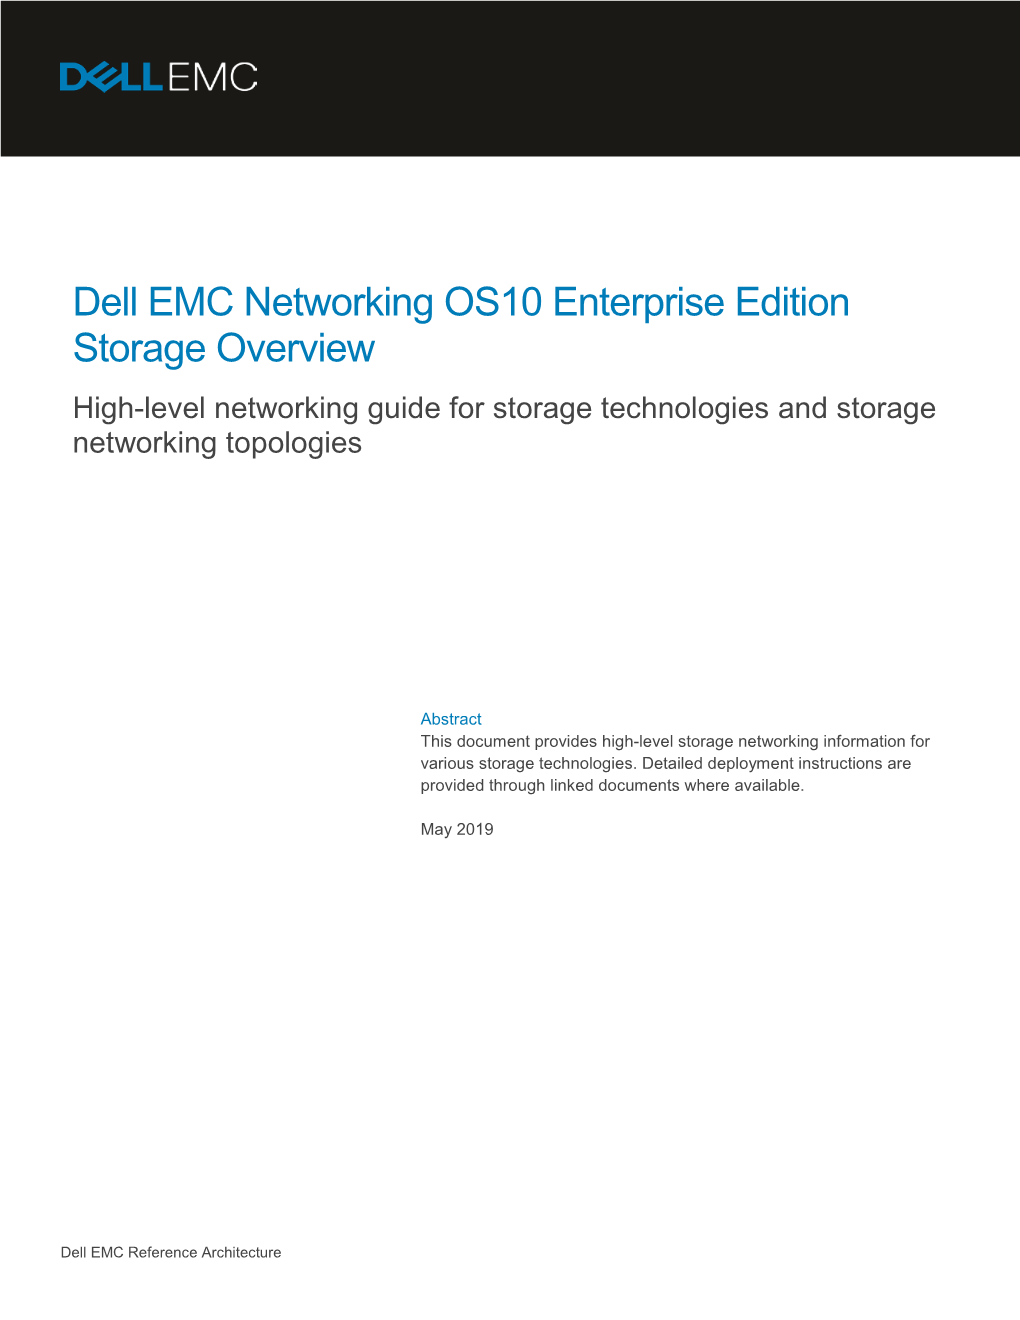 Dell EMC Networking OS10 Enterprise Edition Storage Overview High-Level Networking Guide for Storage Technologies and Storage Networking Topologies